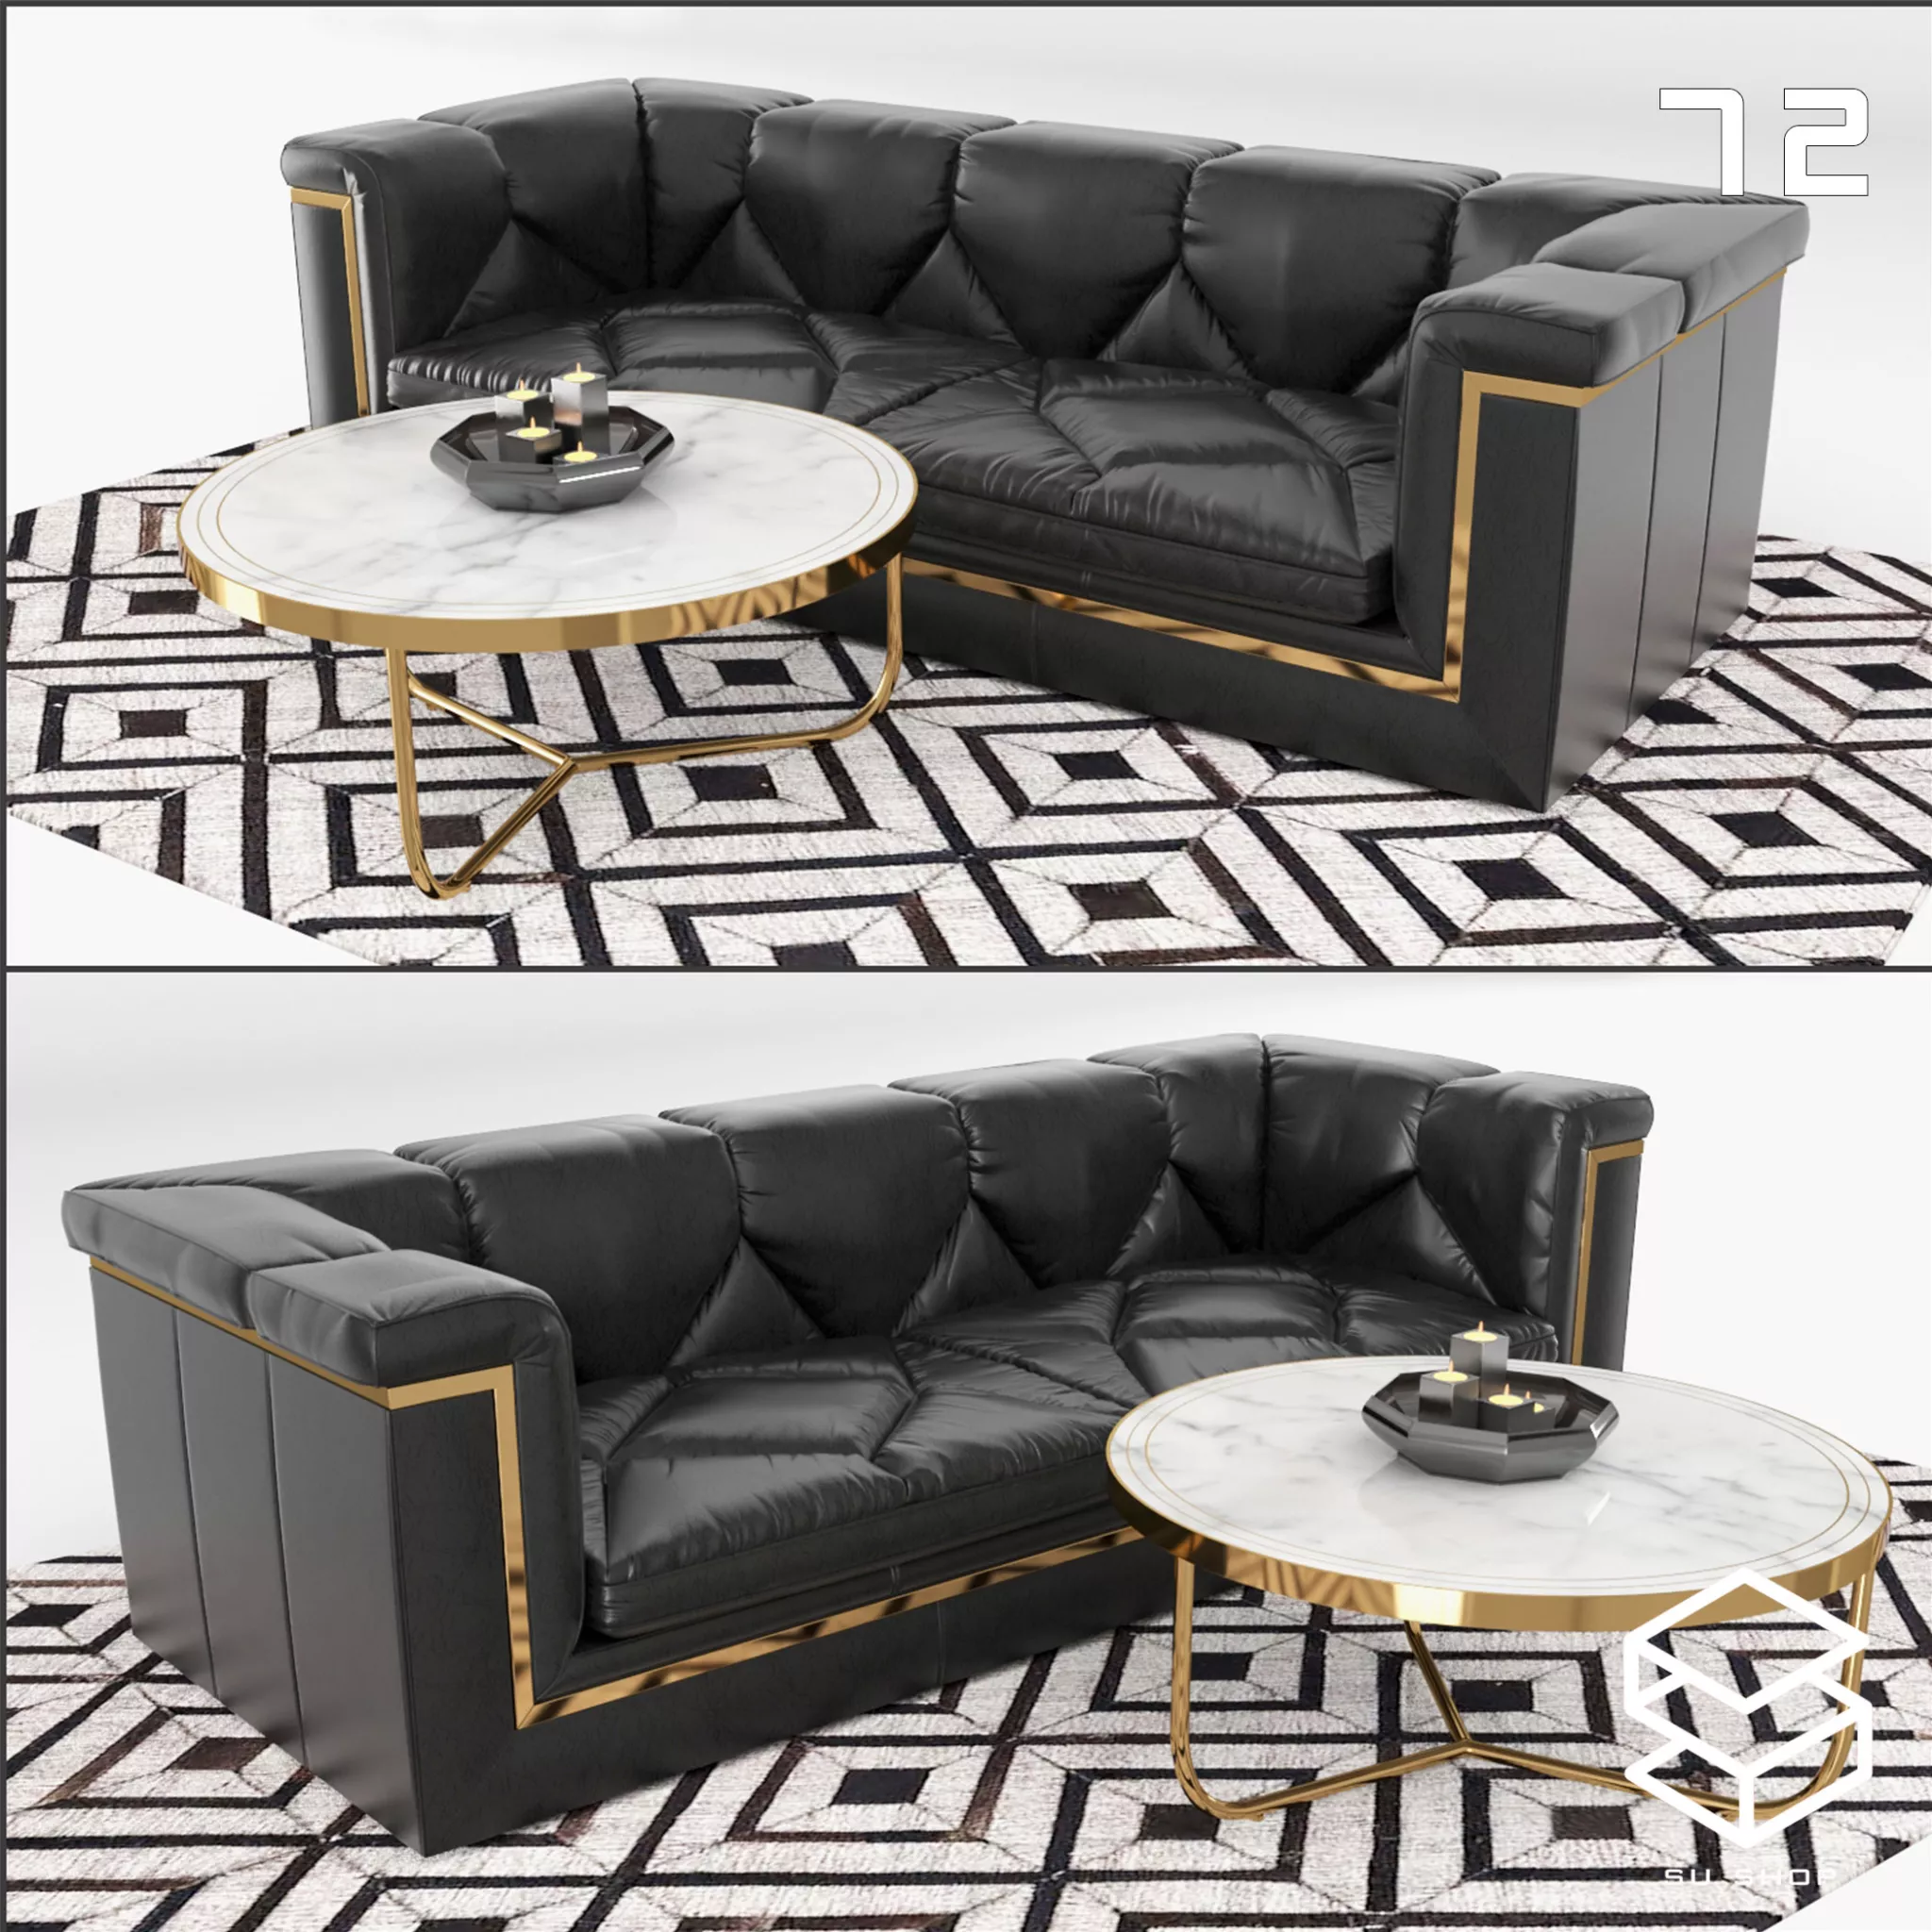 MODERN SOFA - SKETCHUP 3D MODEL - VRAY OR ENSCAPE - ID13699